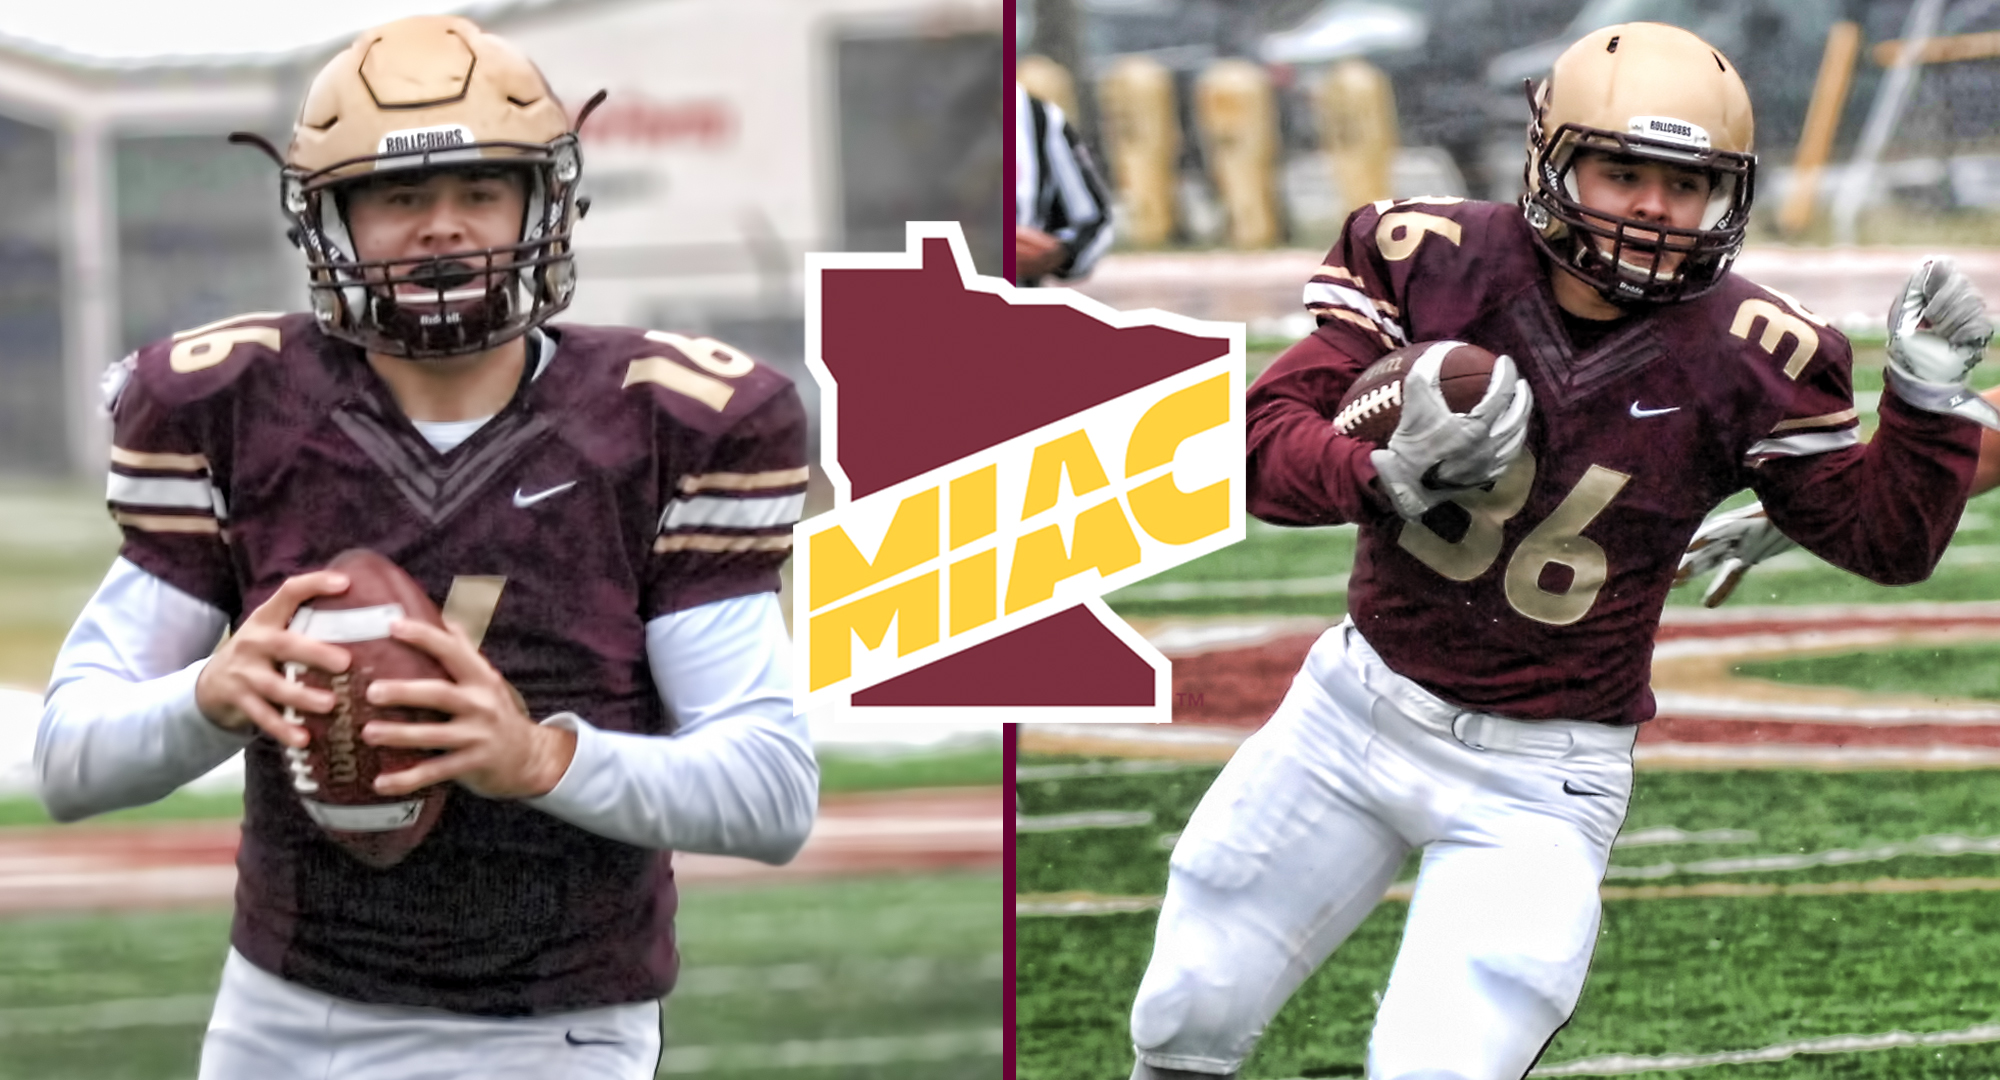 Blake Kragnes (L) and Rylie Sheridan were named MIAC Offensive and Special Teams Players of the Week.